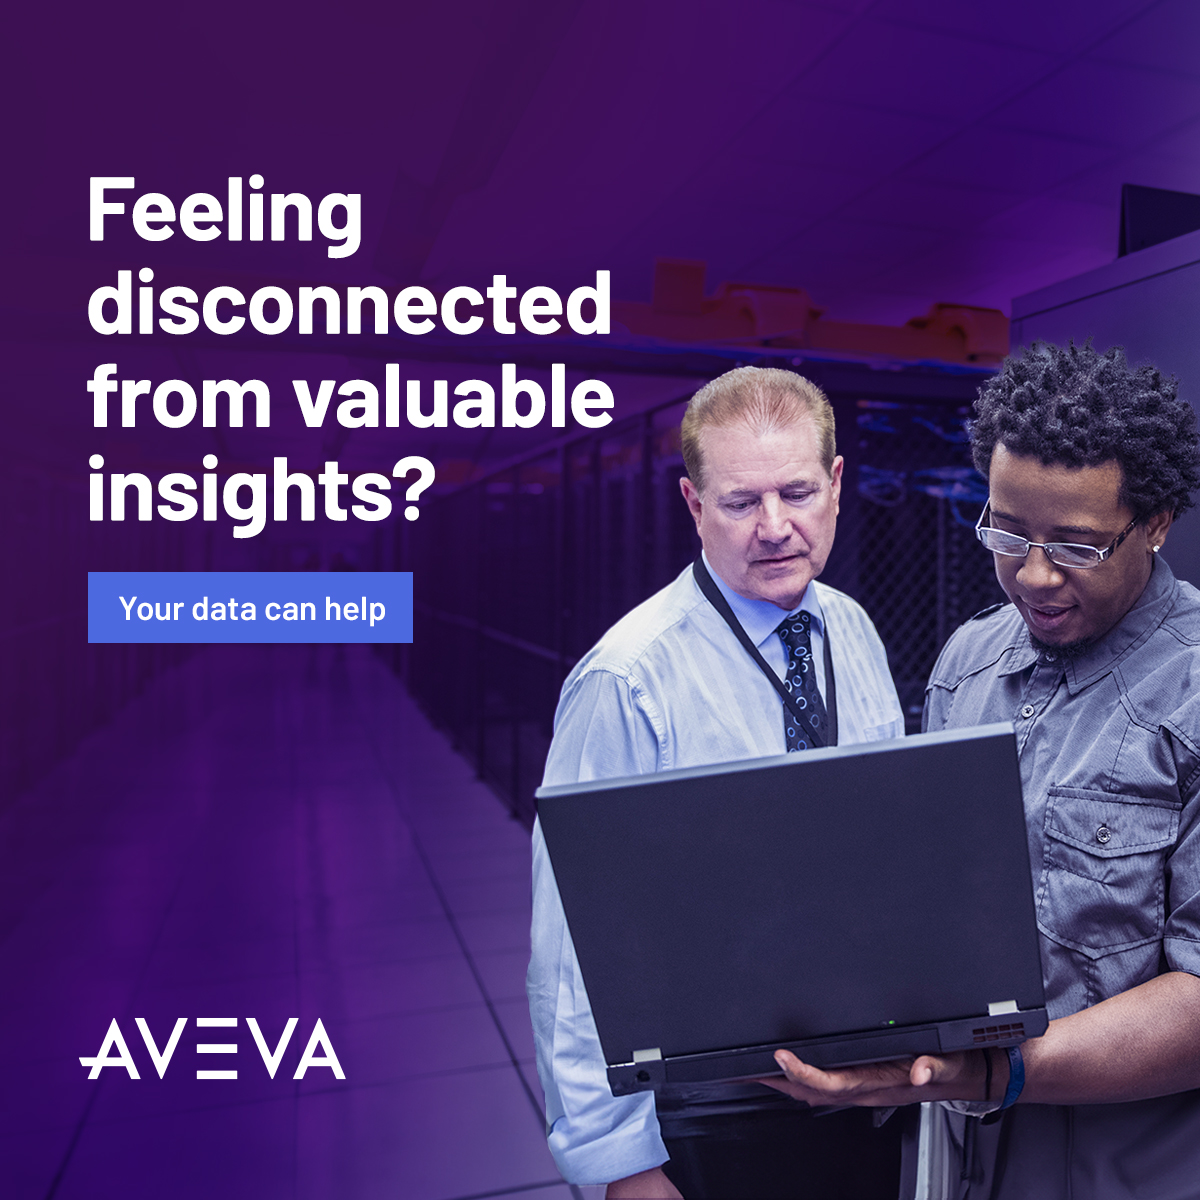 Bridge the gaps in your industrial ecosystem and gain a 360° view of your #Operations for faster, smarter business decisions.

Learn more about AVEVA Connect’s new features and advanced data services . Read the blog ➡️ bit.ly/3USOJEj #cloud #datasharing #AVEVAConnect